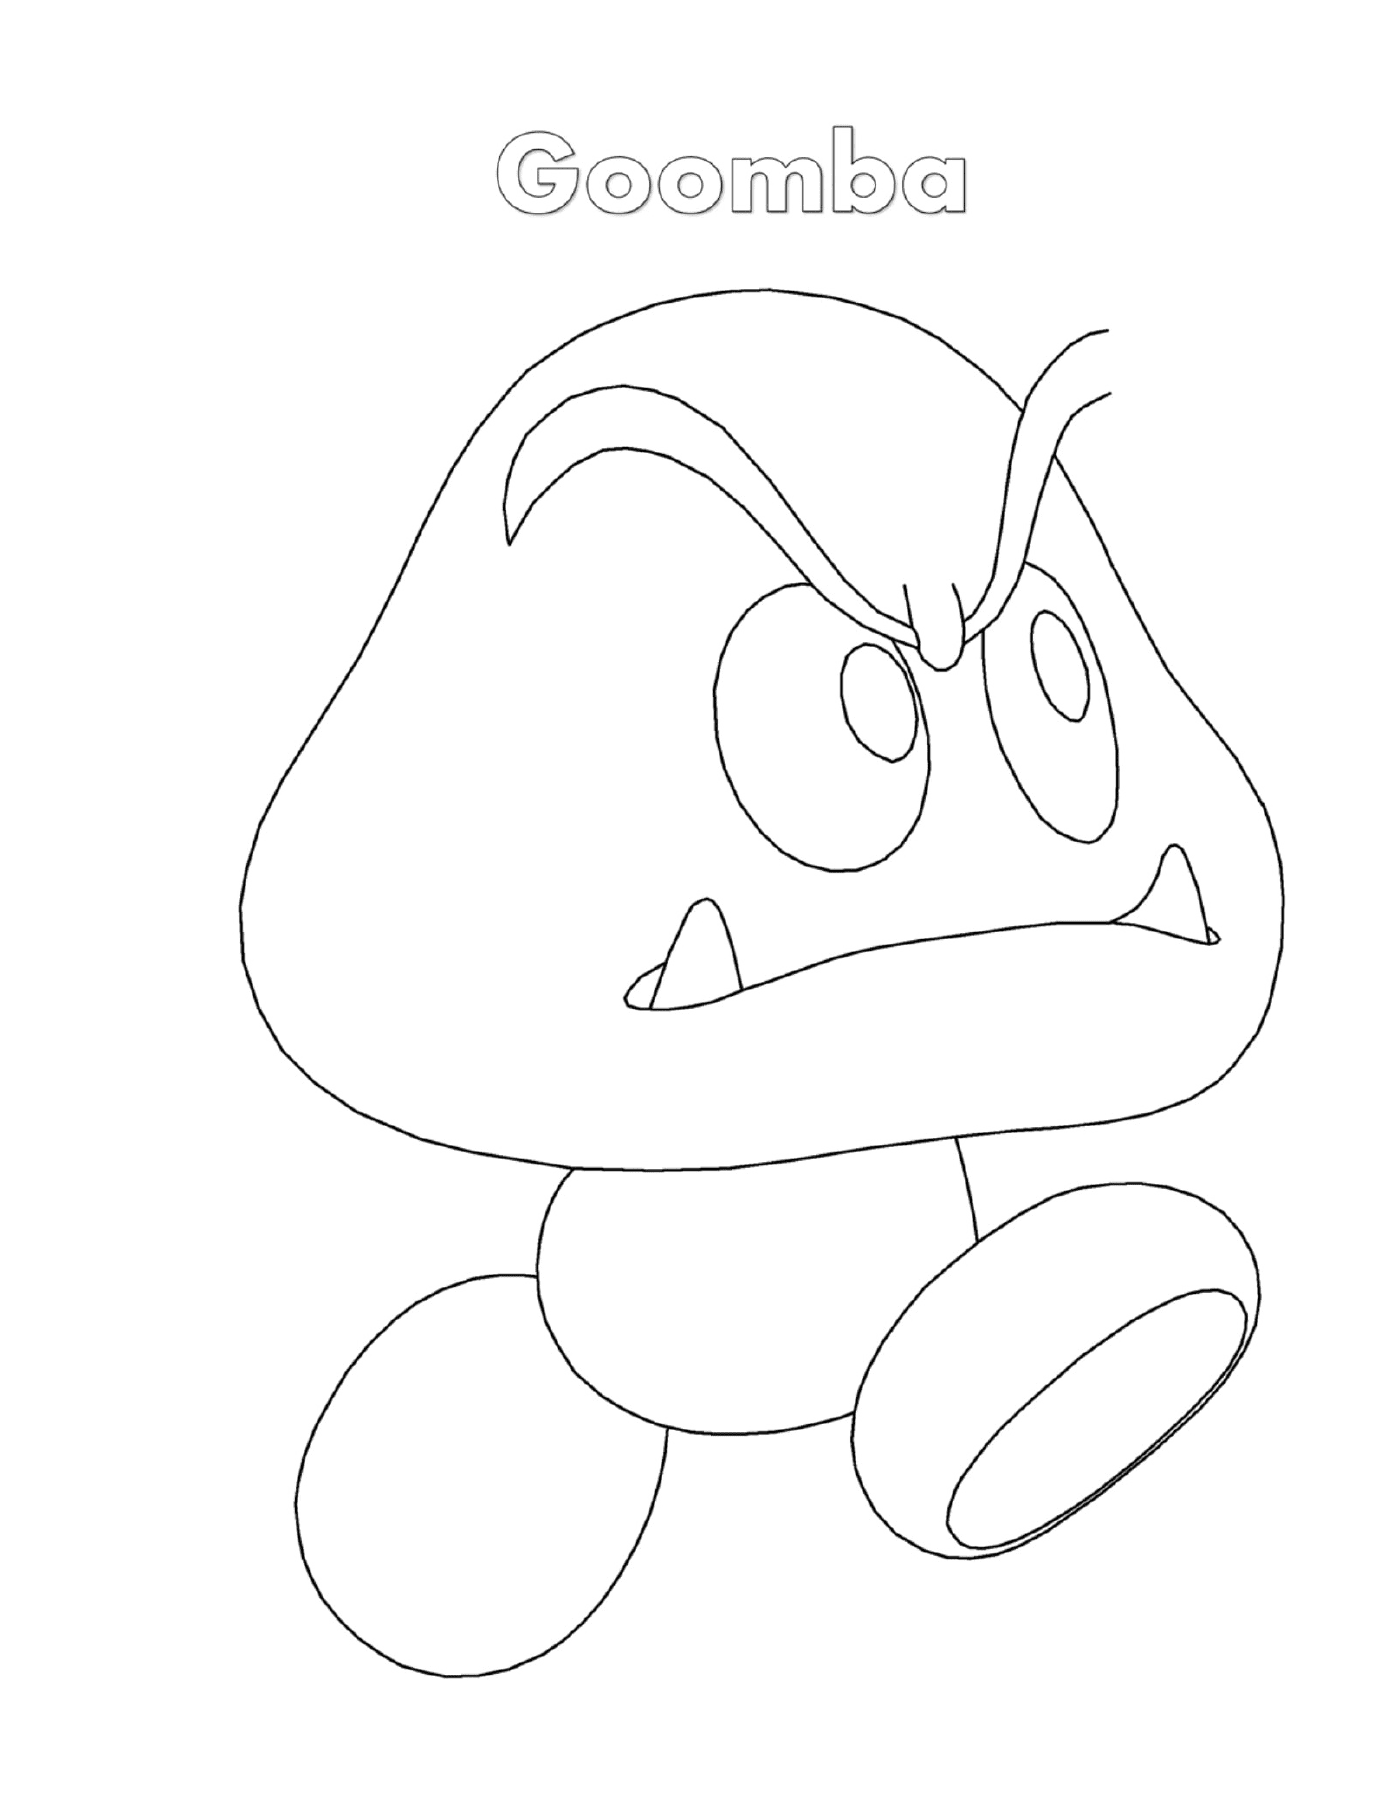  Goomba, a character from Nintendo 